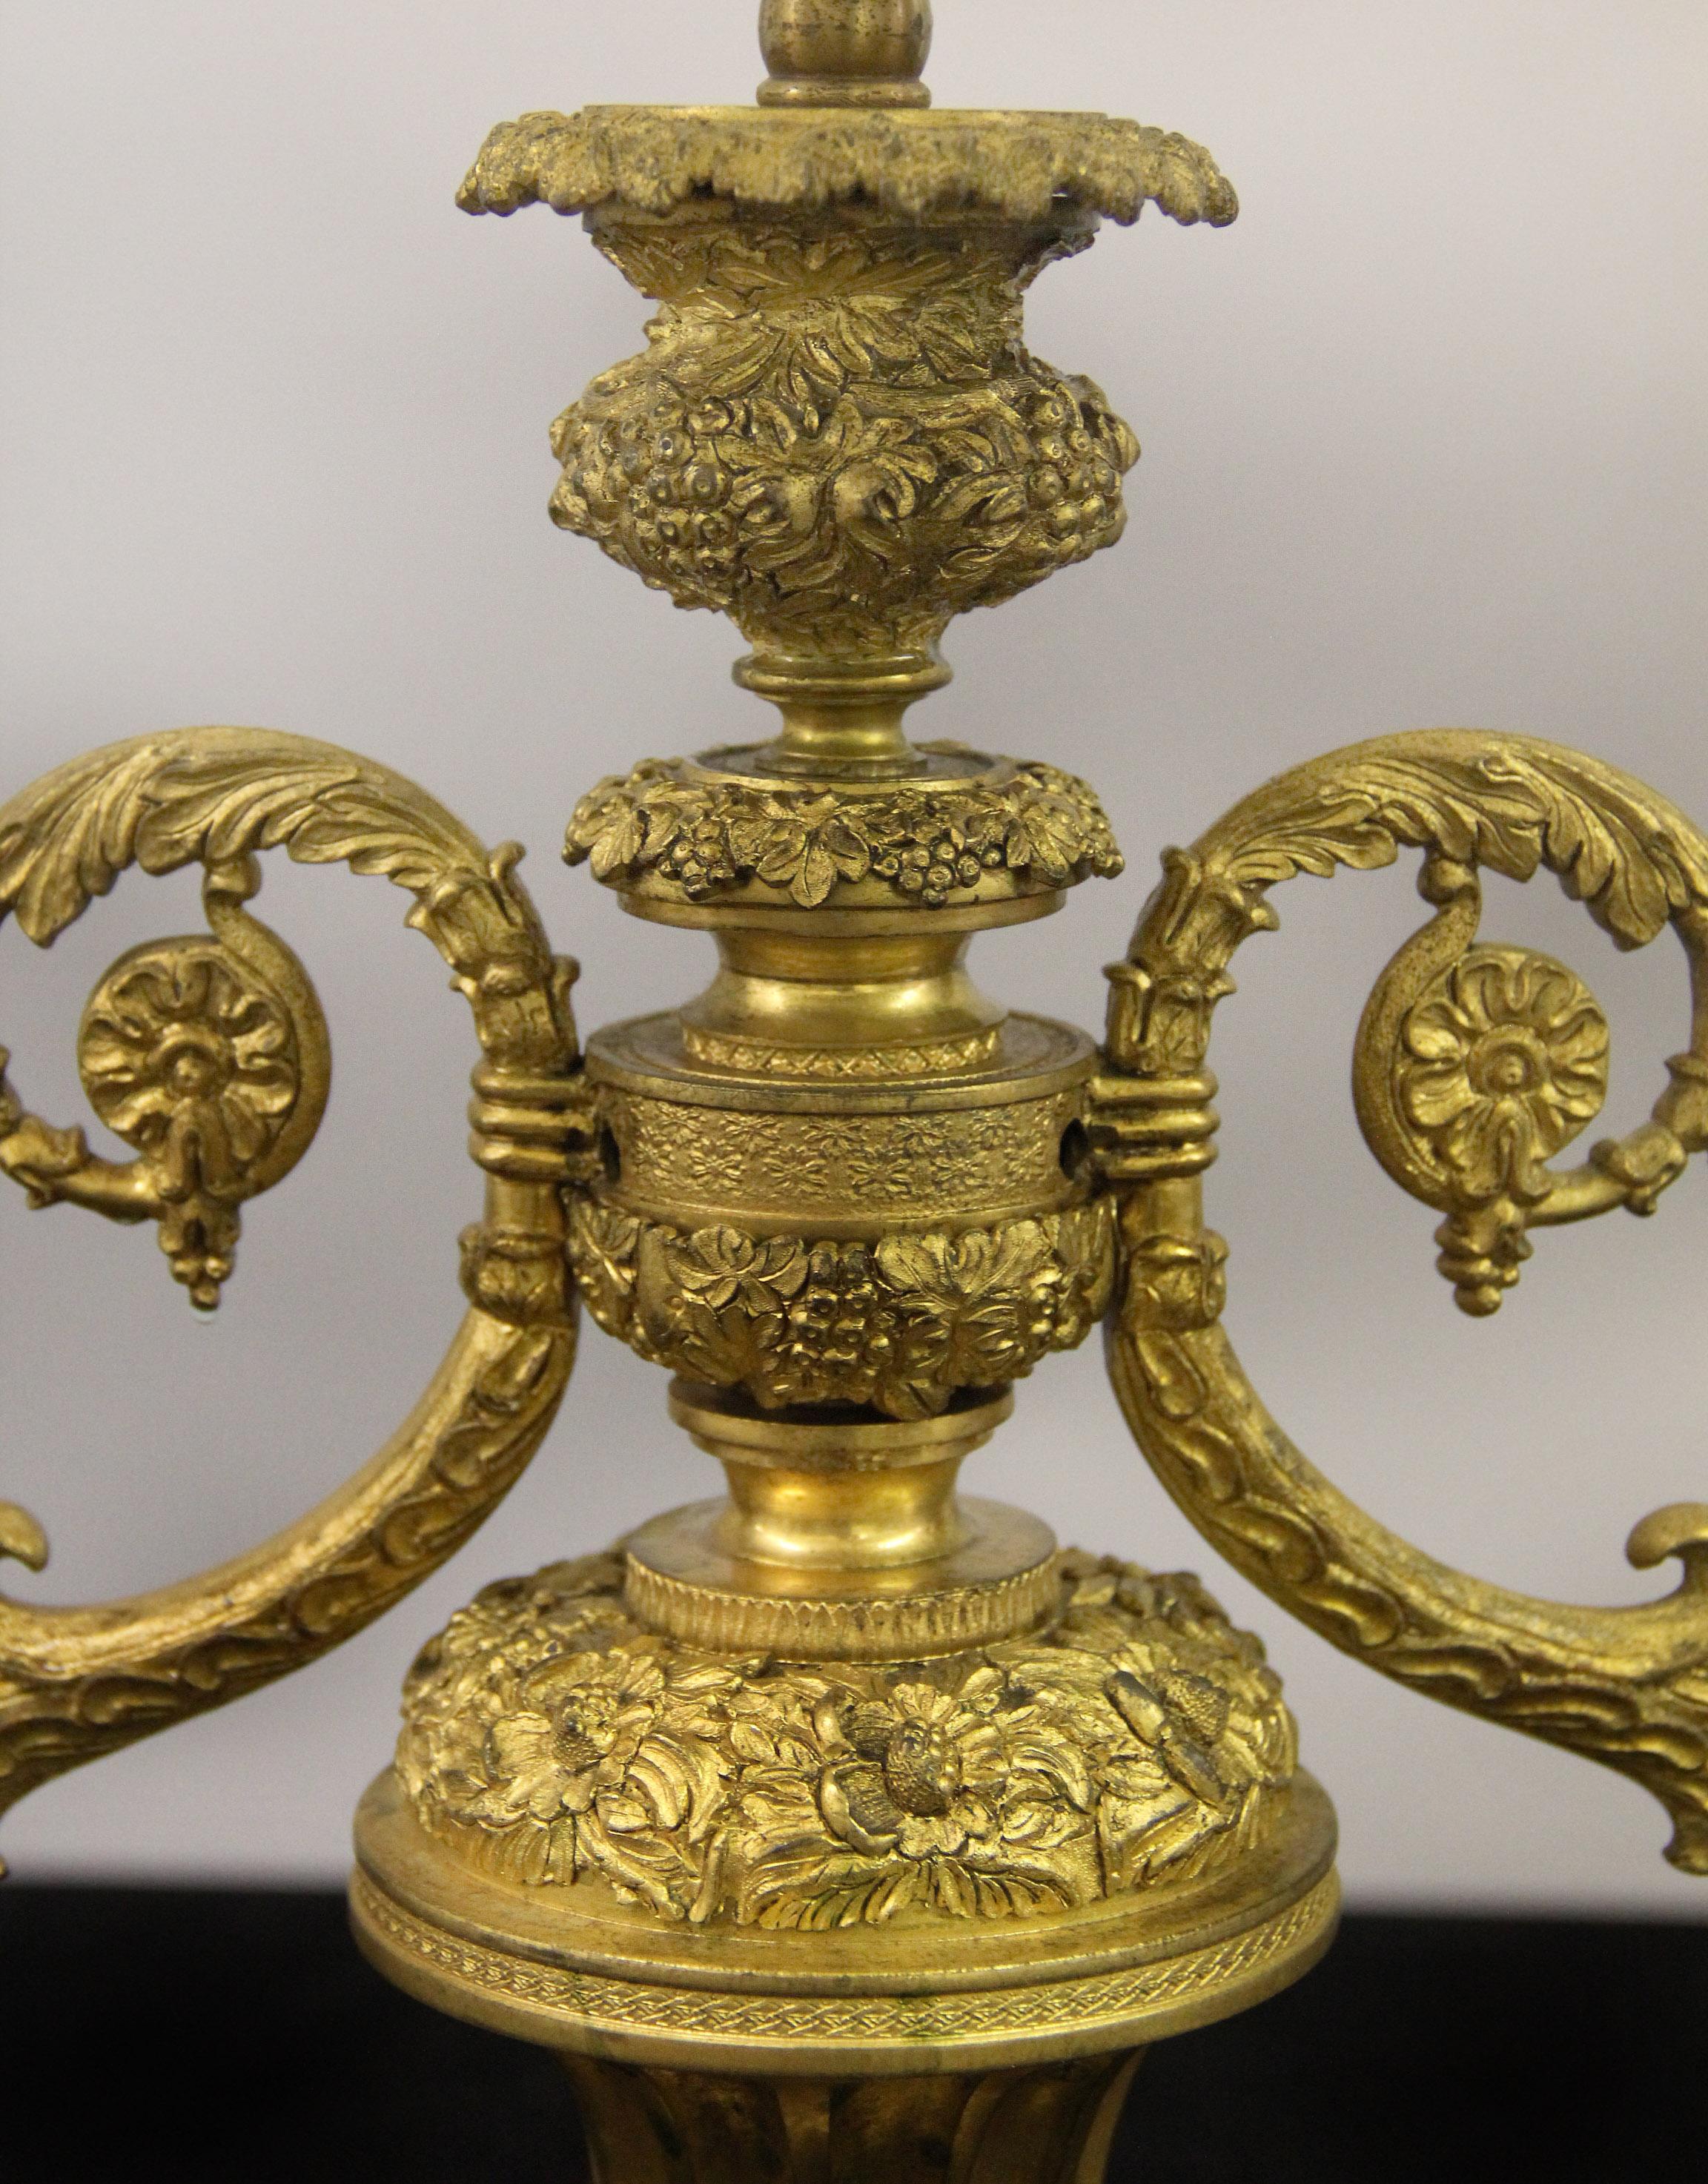 A beautiful late 19th century Empire style gilt bronze bouillotte lamp

Fantastic quality bronze lamp entirely chiseled with berries and flowers, two C scrolled arms extend with winged griffins and candle holders, the bottom with three large paws